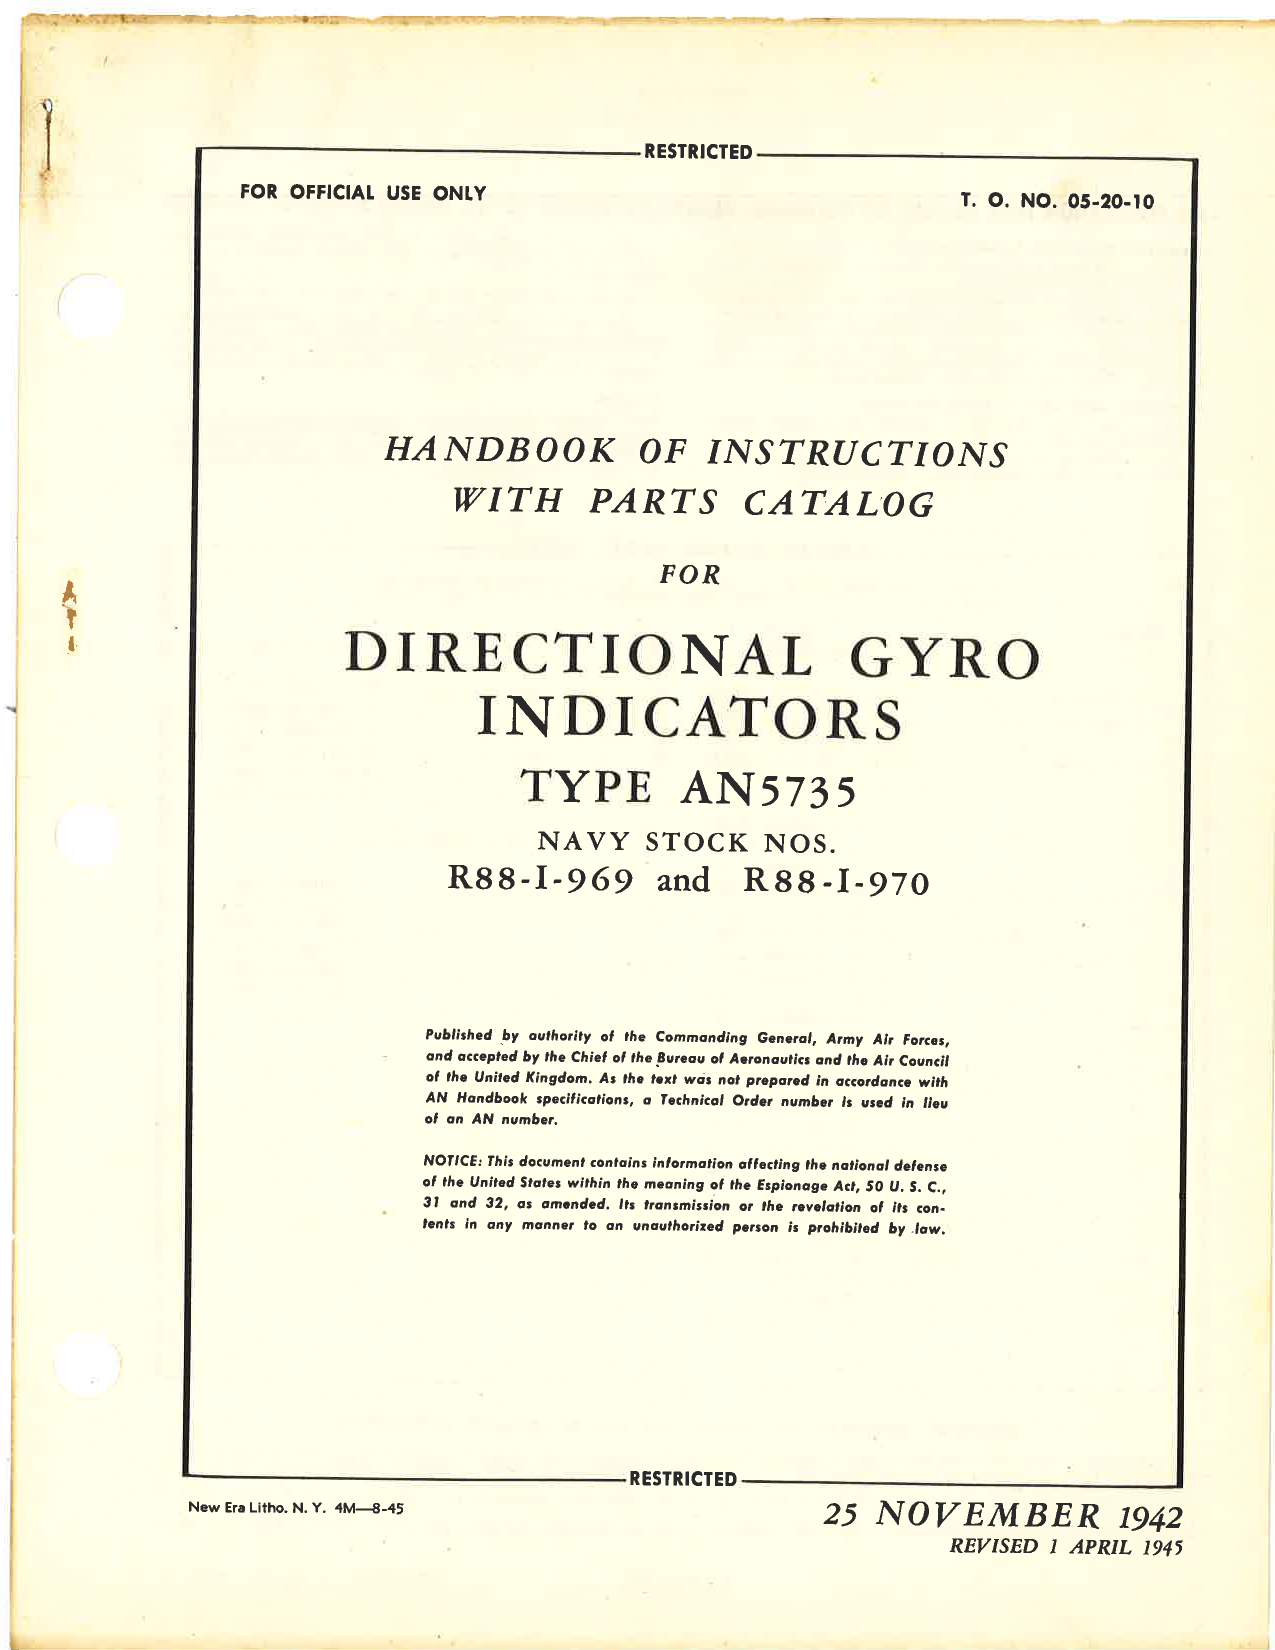 Sample page 1 from AirCorps Library document: Handbook of Instructions with Parts Catalog for Directional Gyro Indicators